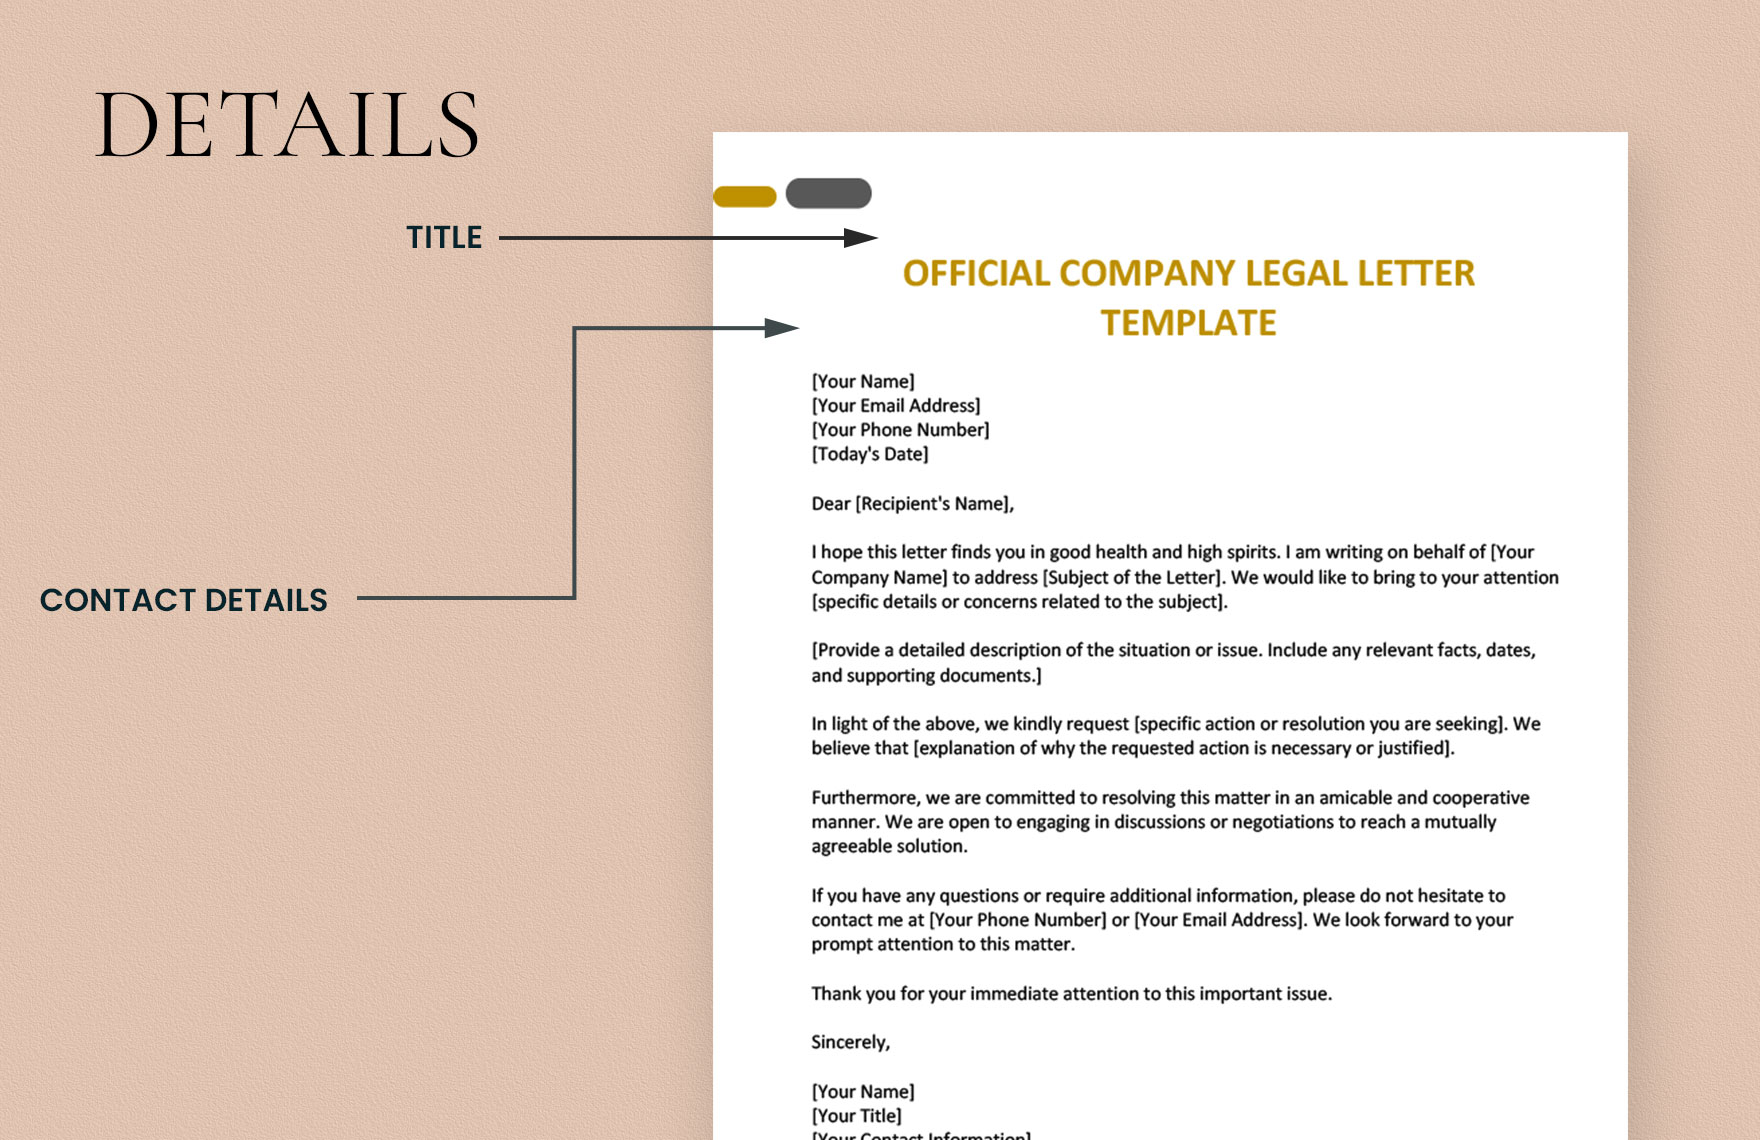 Official Company Legal Letter Template